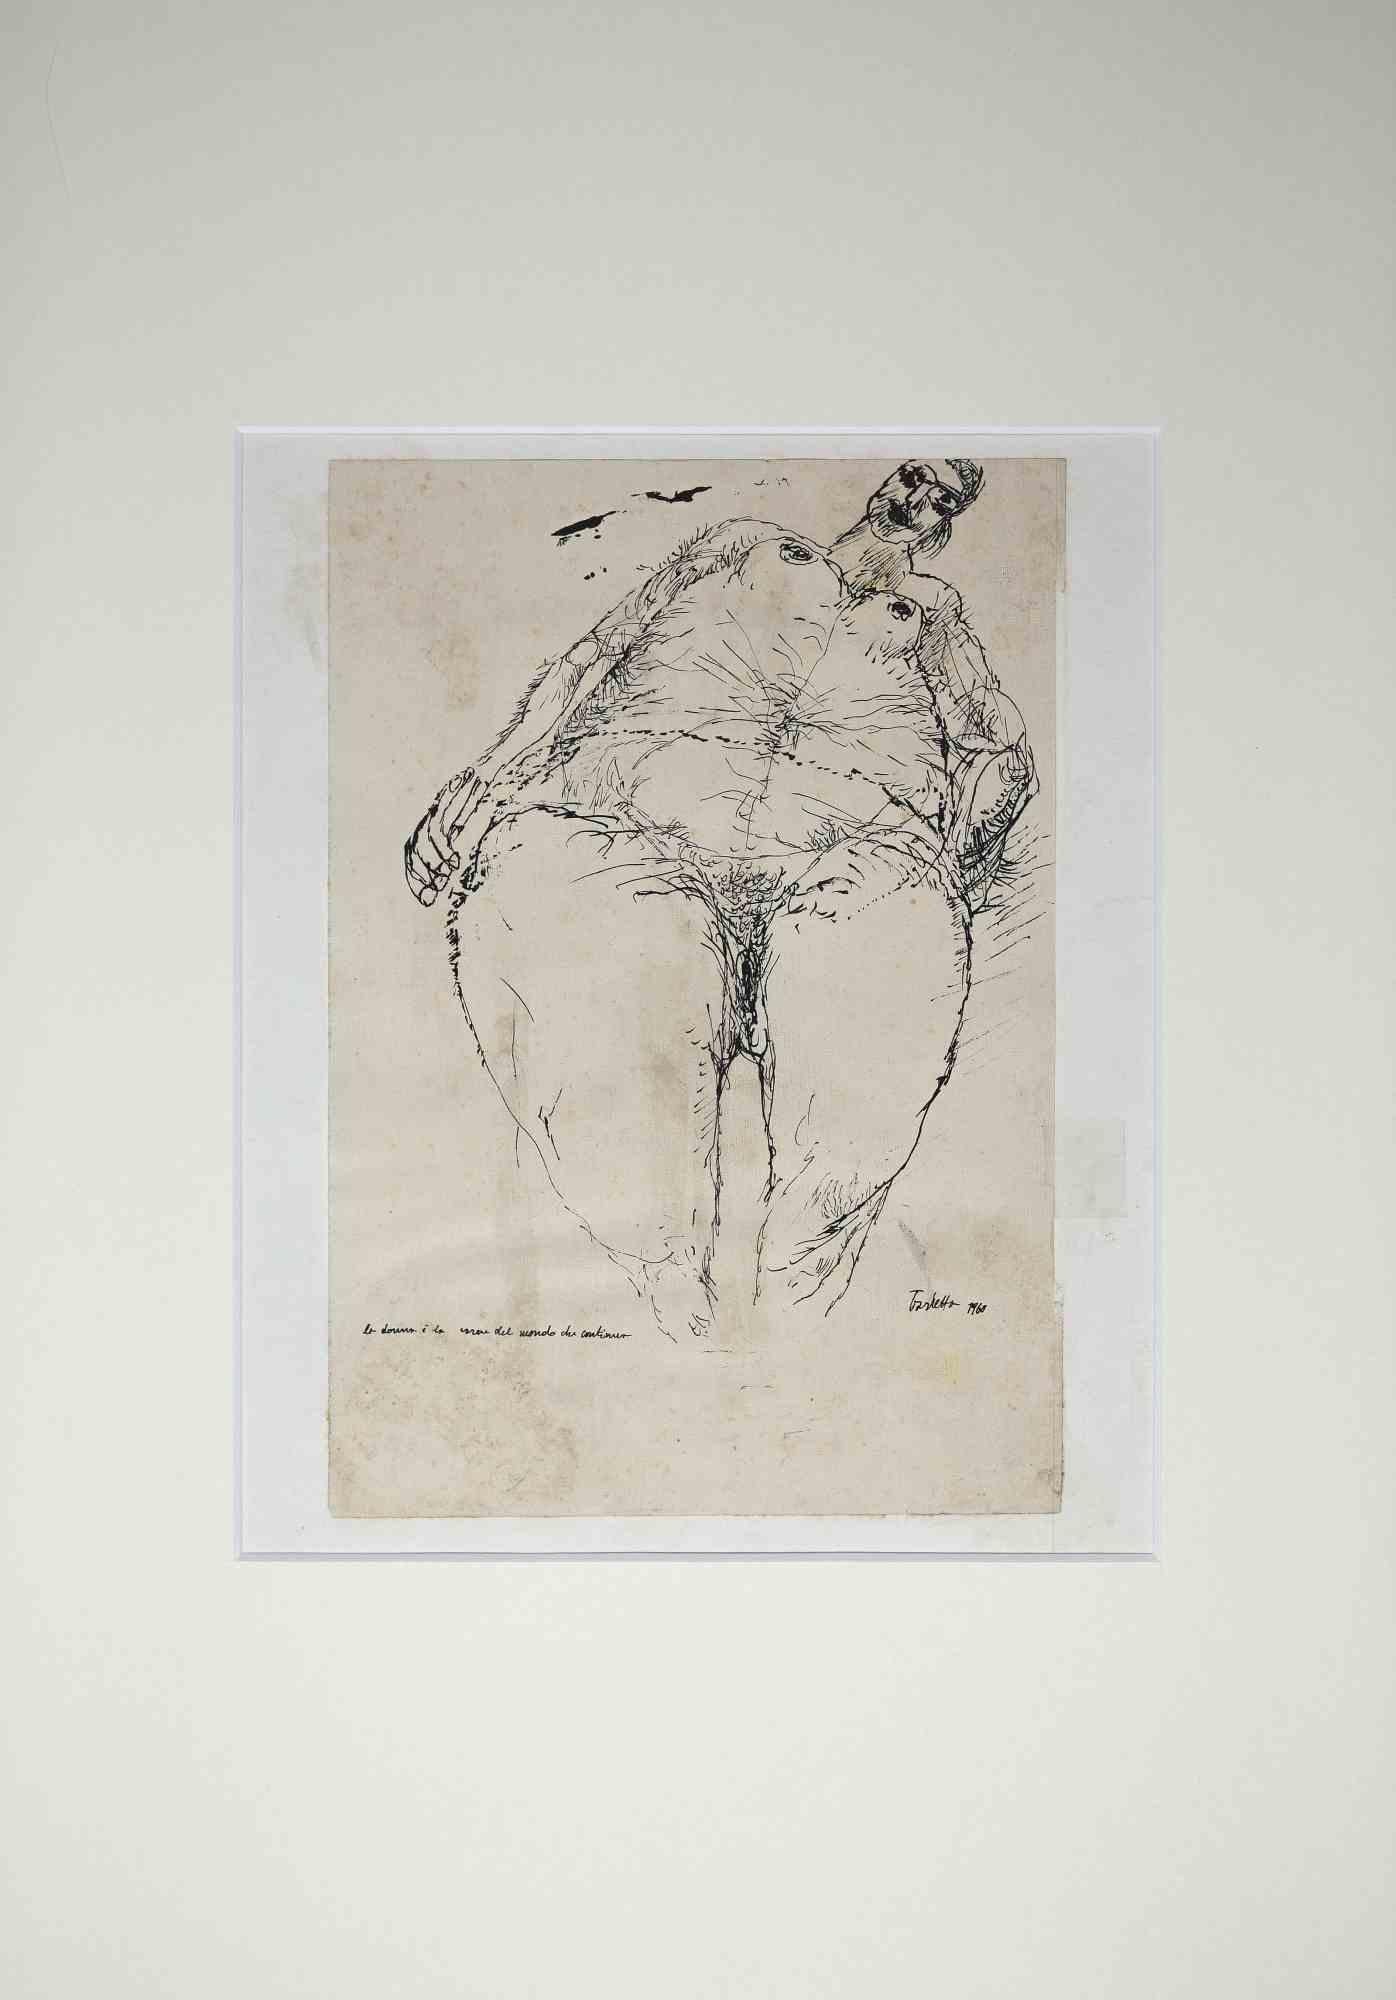 Female Figure is an original drawing artwork, realized by Sergio Barletta in 1960s.

Hand-signed and dated on the lower margin. 

Good conditions (some stains and light yellowing of paper).

Included passport, 49 x 34 cm.

Sergio Barletta (1934) is 